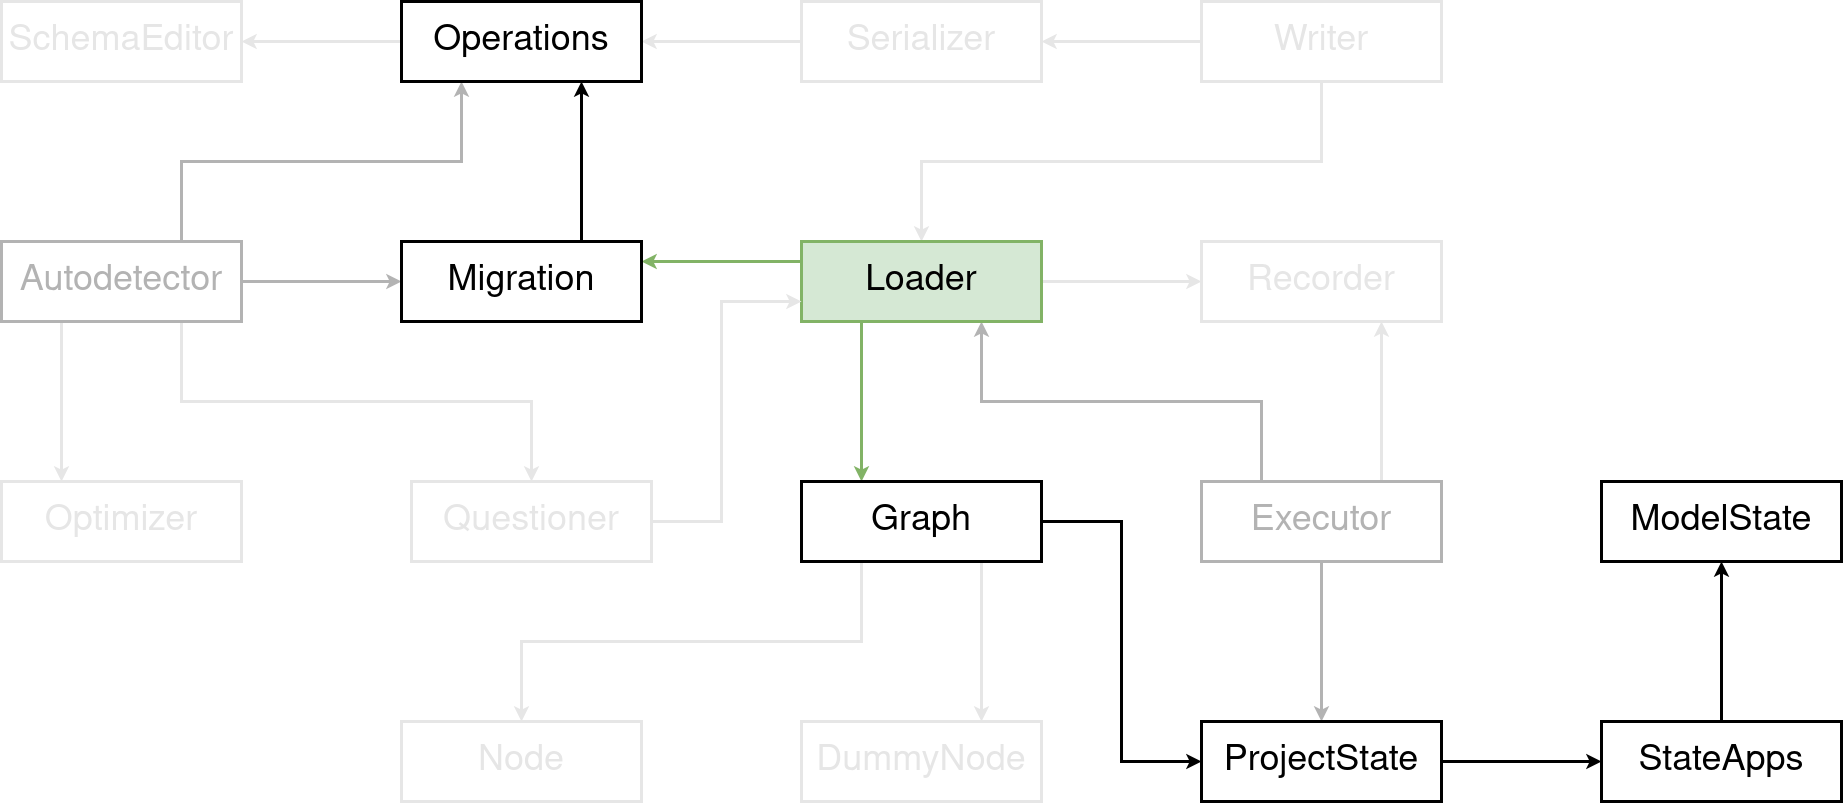 Highlighted the loader component in the diagram